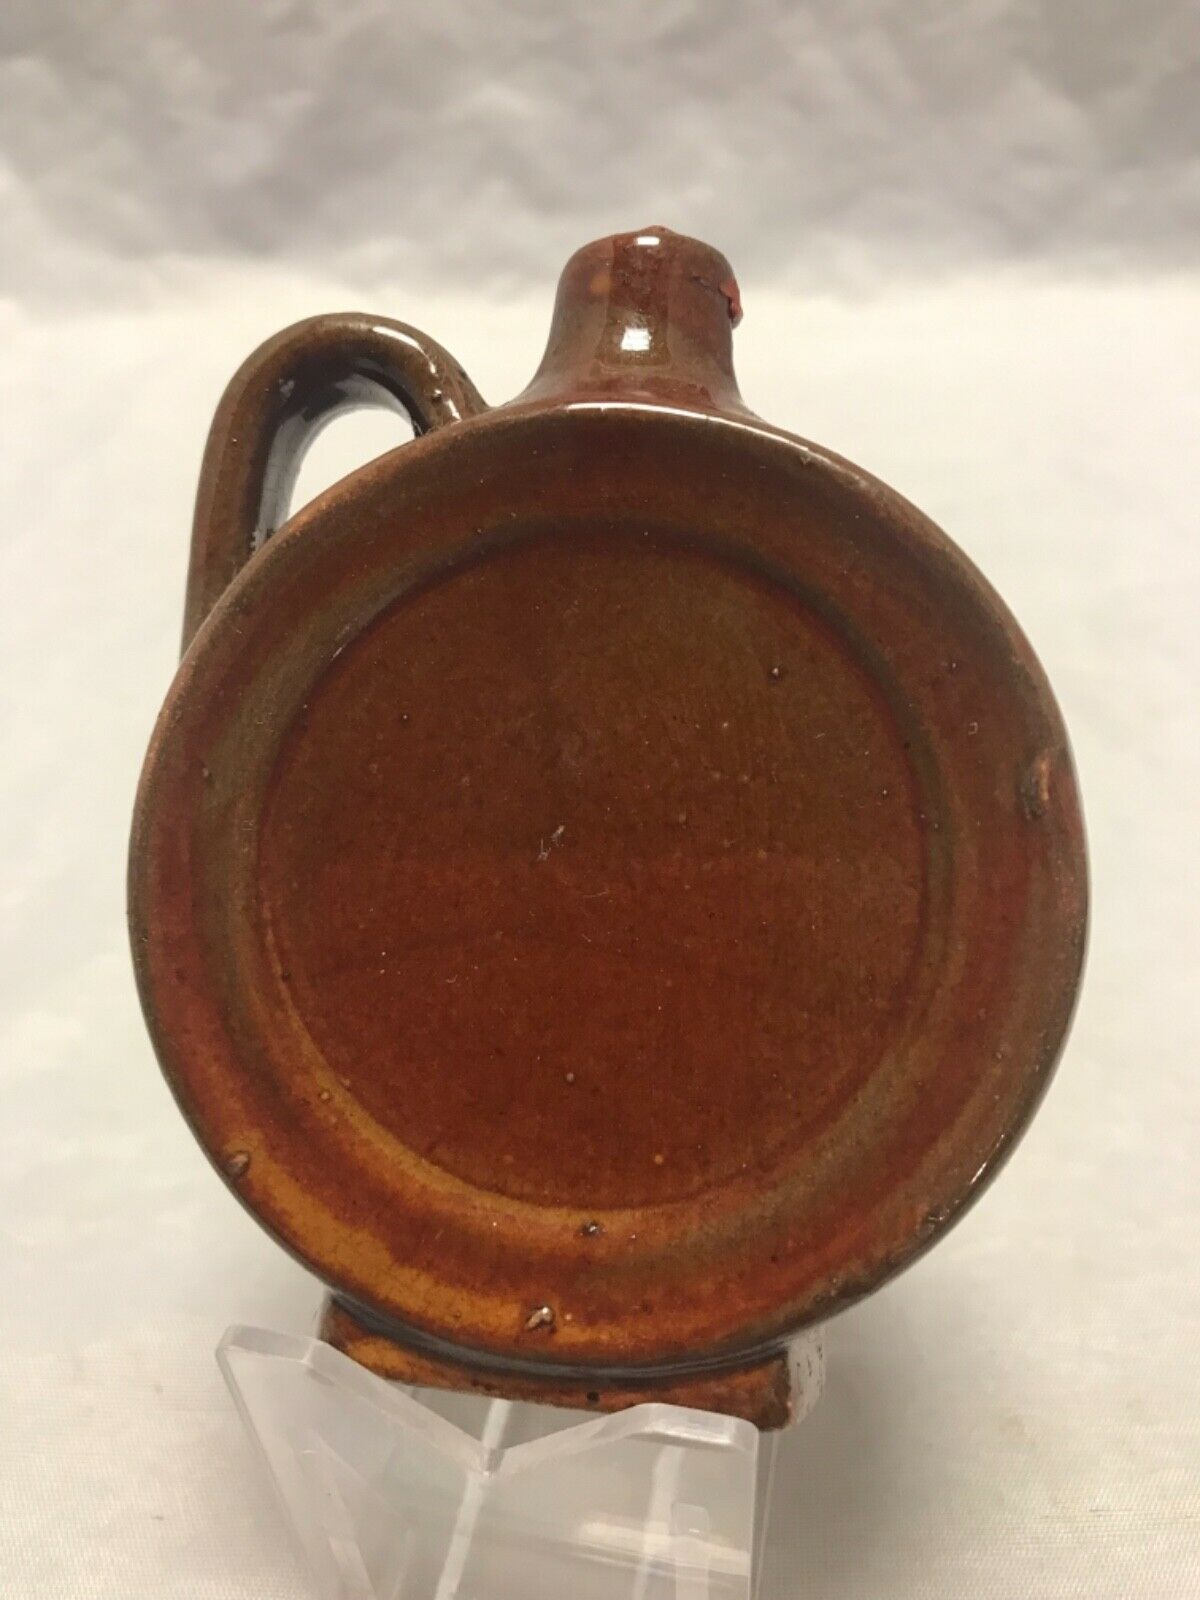 Uhl Pottery Brown Miniature Canteen Jug With Meier’s Winery Foil Label & Tax